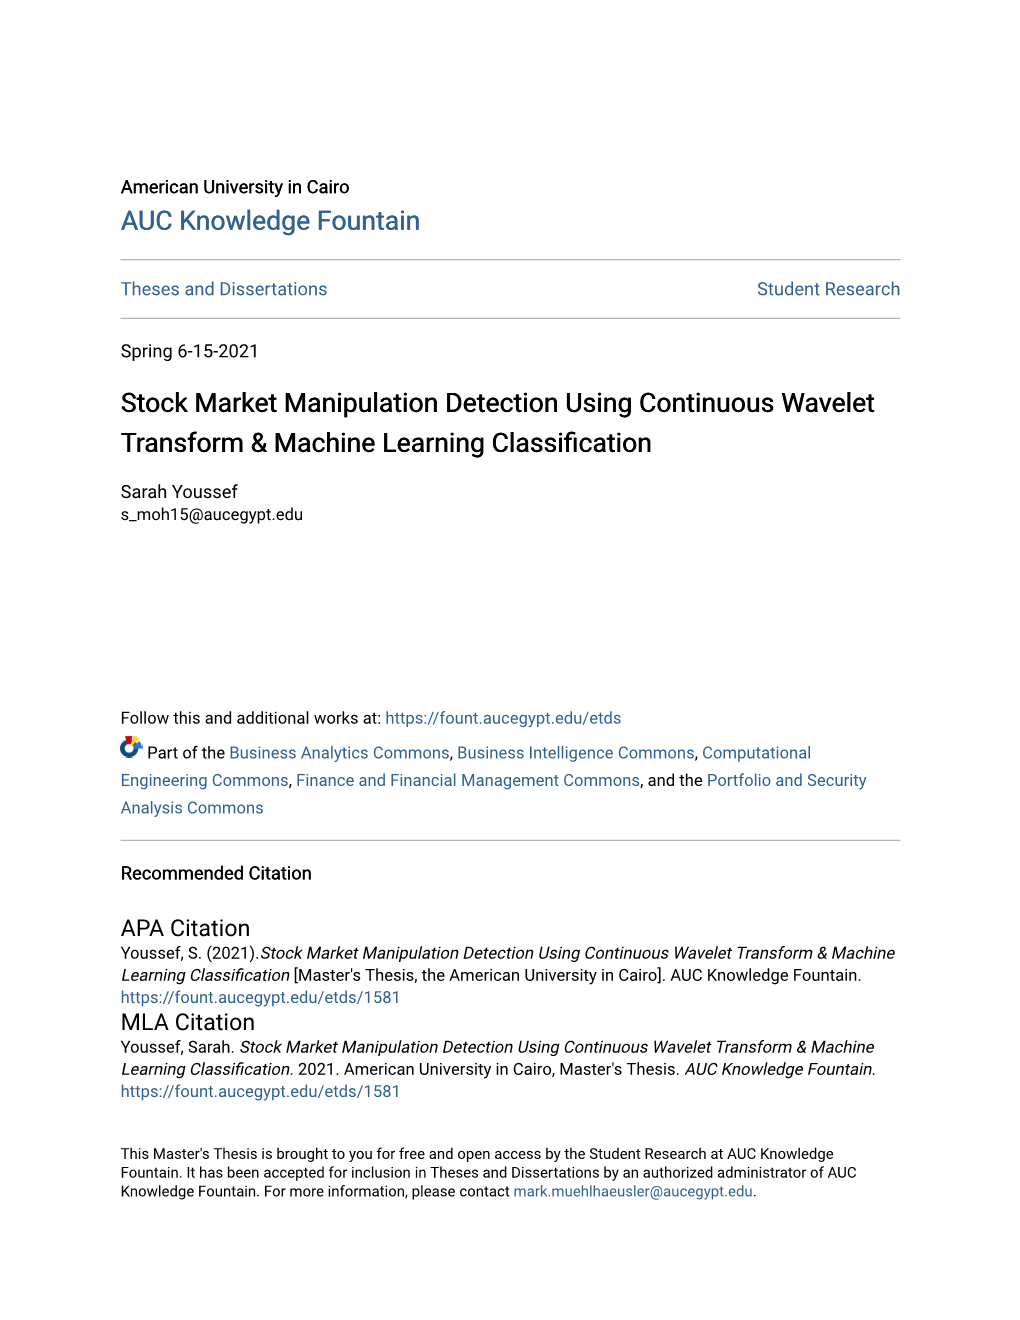 Stock Market Manipulation Detection Using Continuous Wavelet Transform & Machine Learning Classification